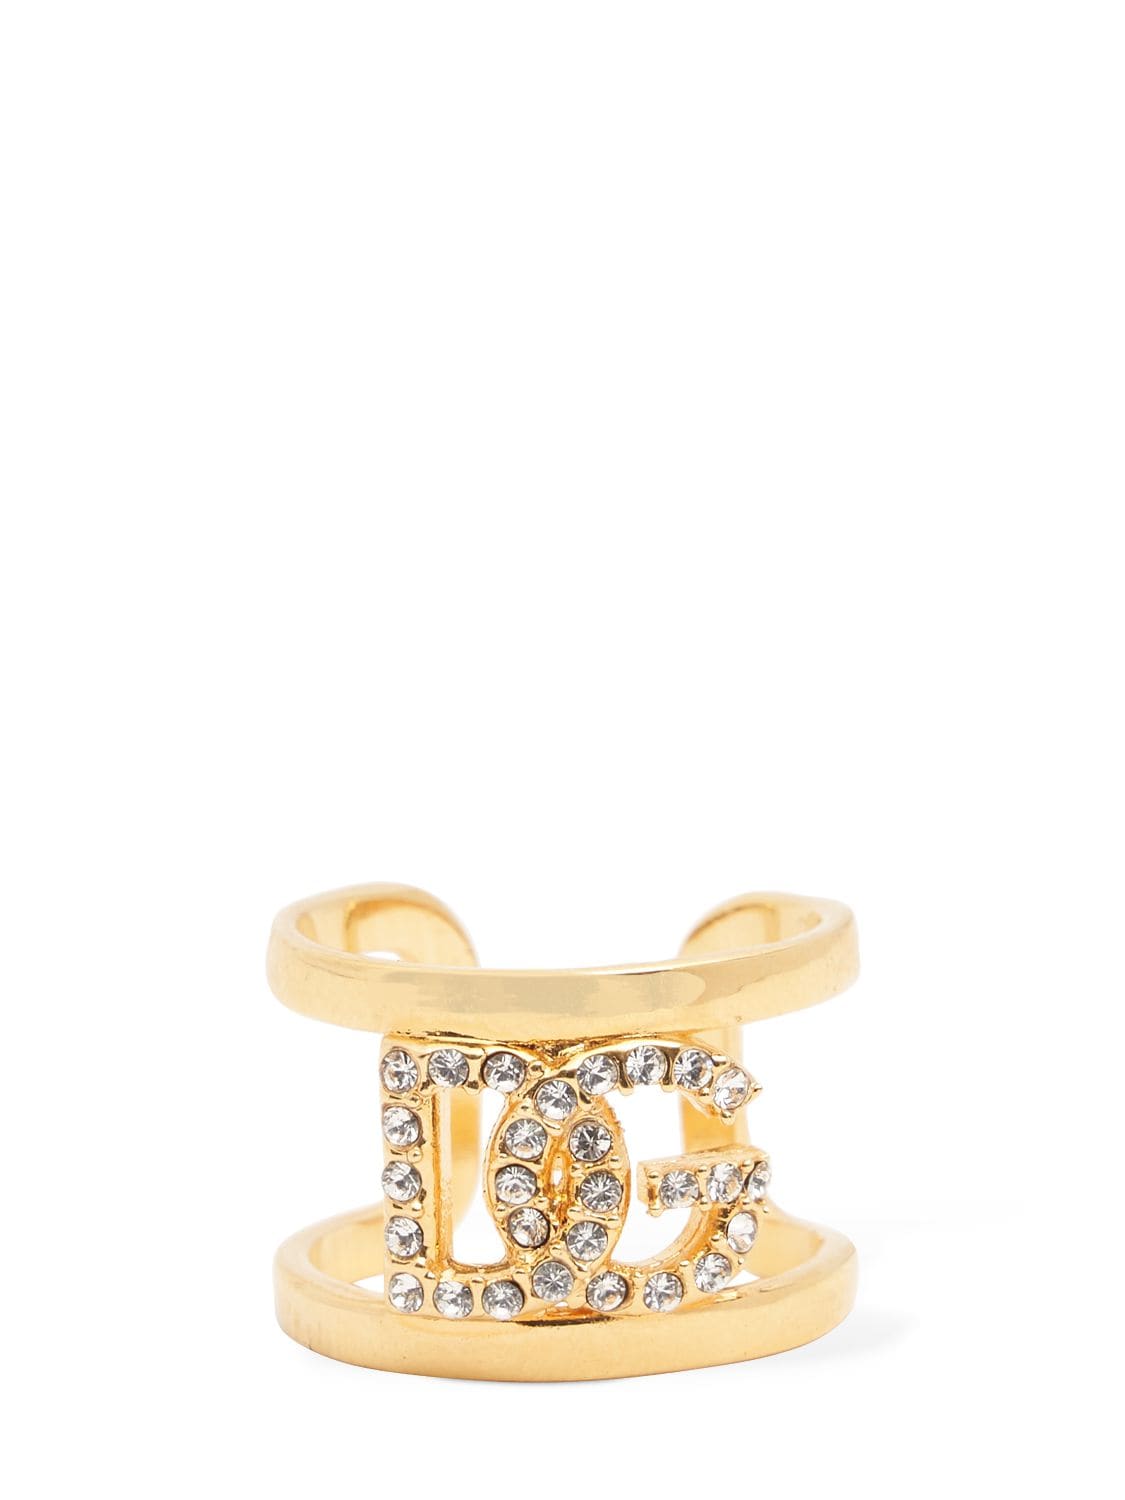 Dolce & Gabbana Dg Crystal Open Ring In Yellow Gold